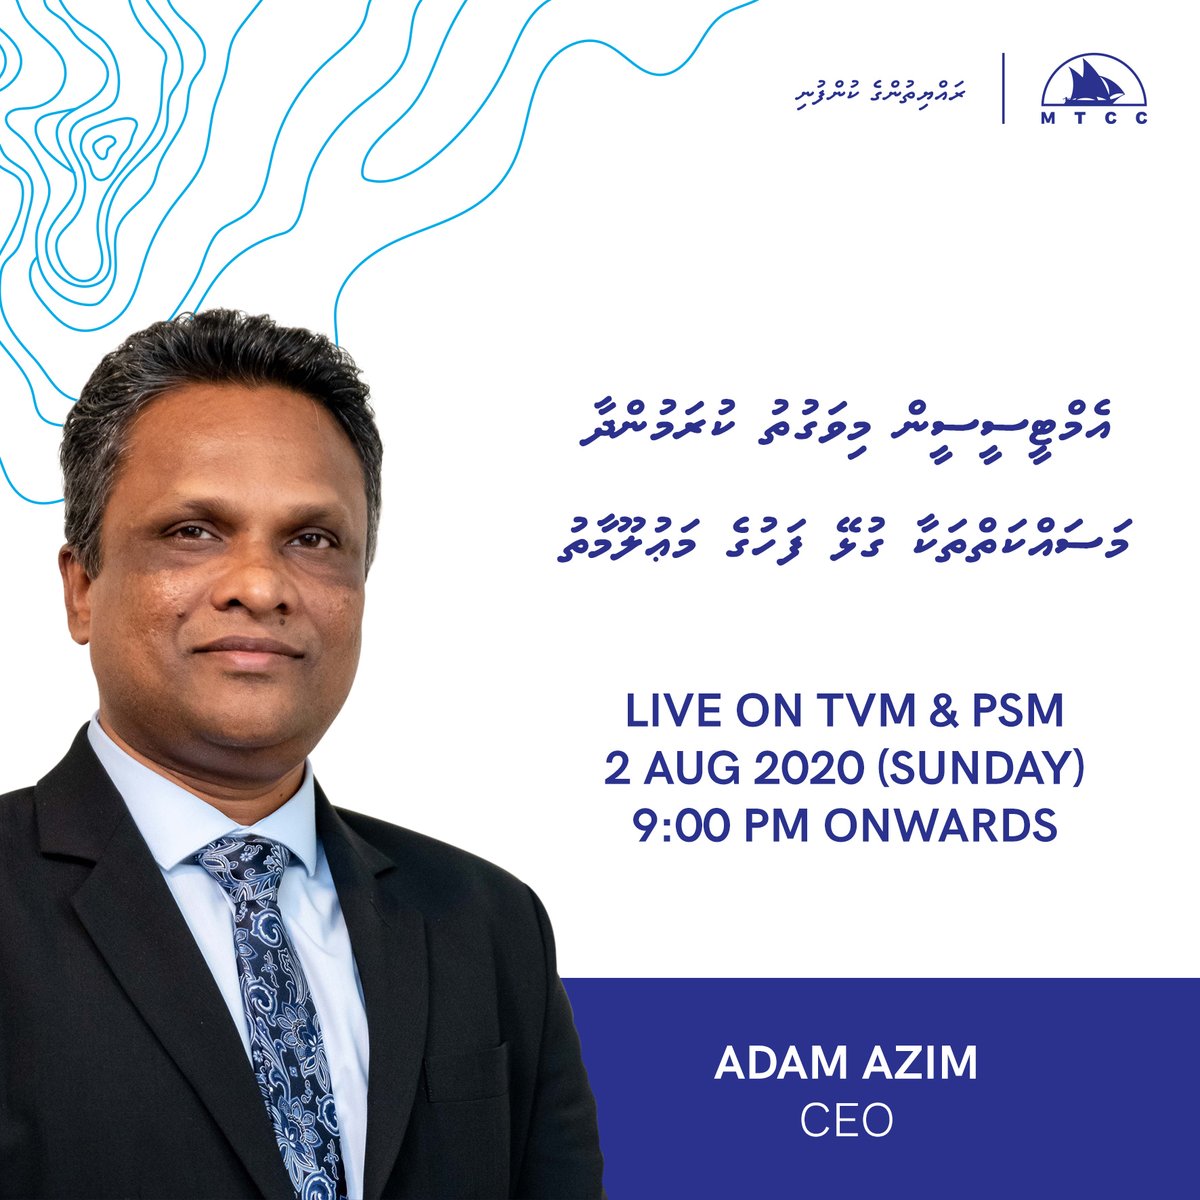 Tune into #RaajjeMiadhu and #AsluViyafaariverin programs on @tvmaldives and @psmnews tonight from 9:00 pm onward as CEO @adamazim discusses on latest financial and operational developments as we navigate in the new normal.